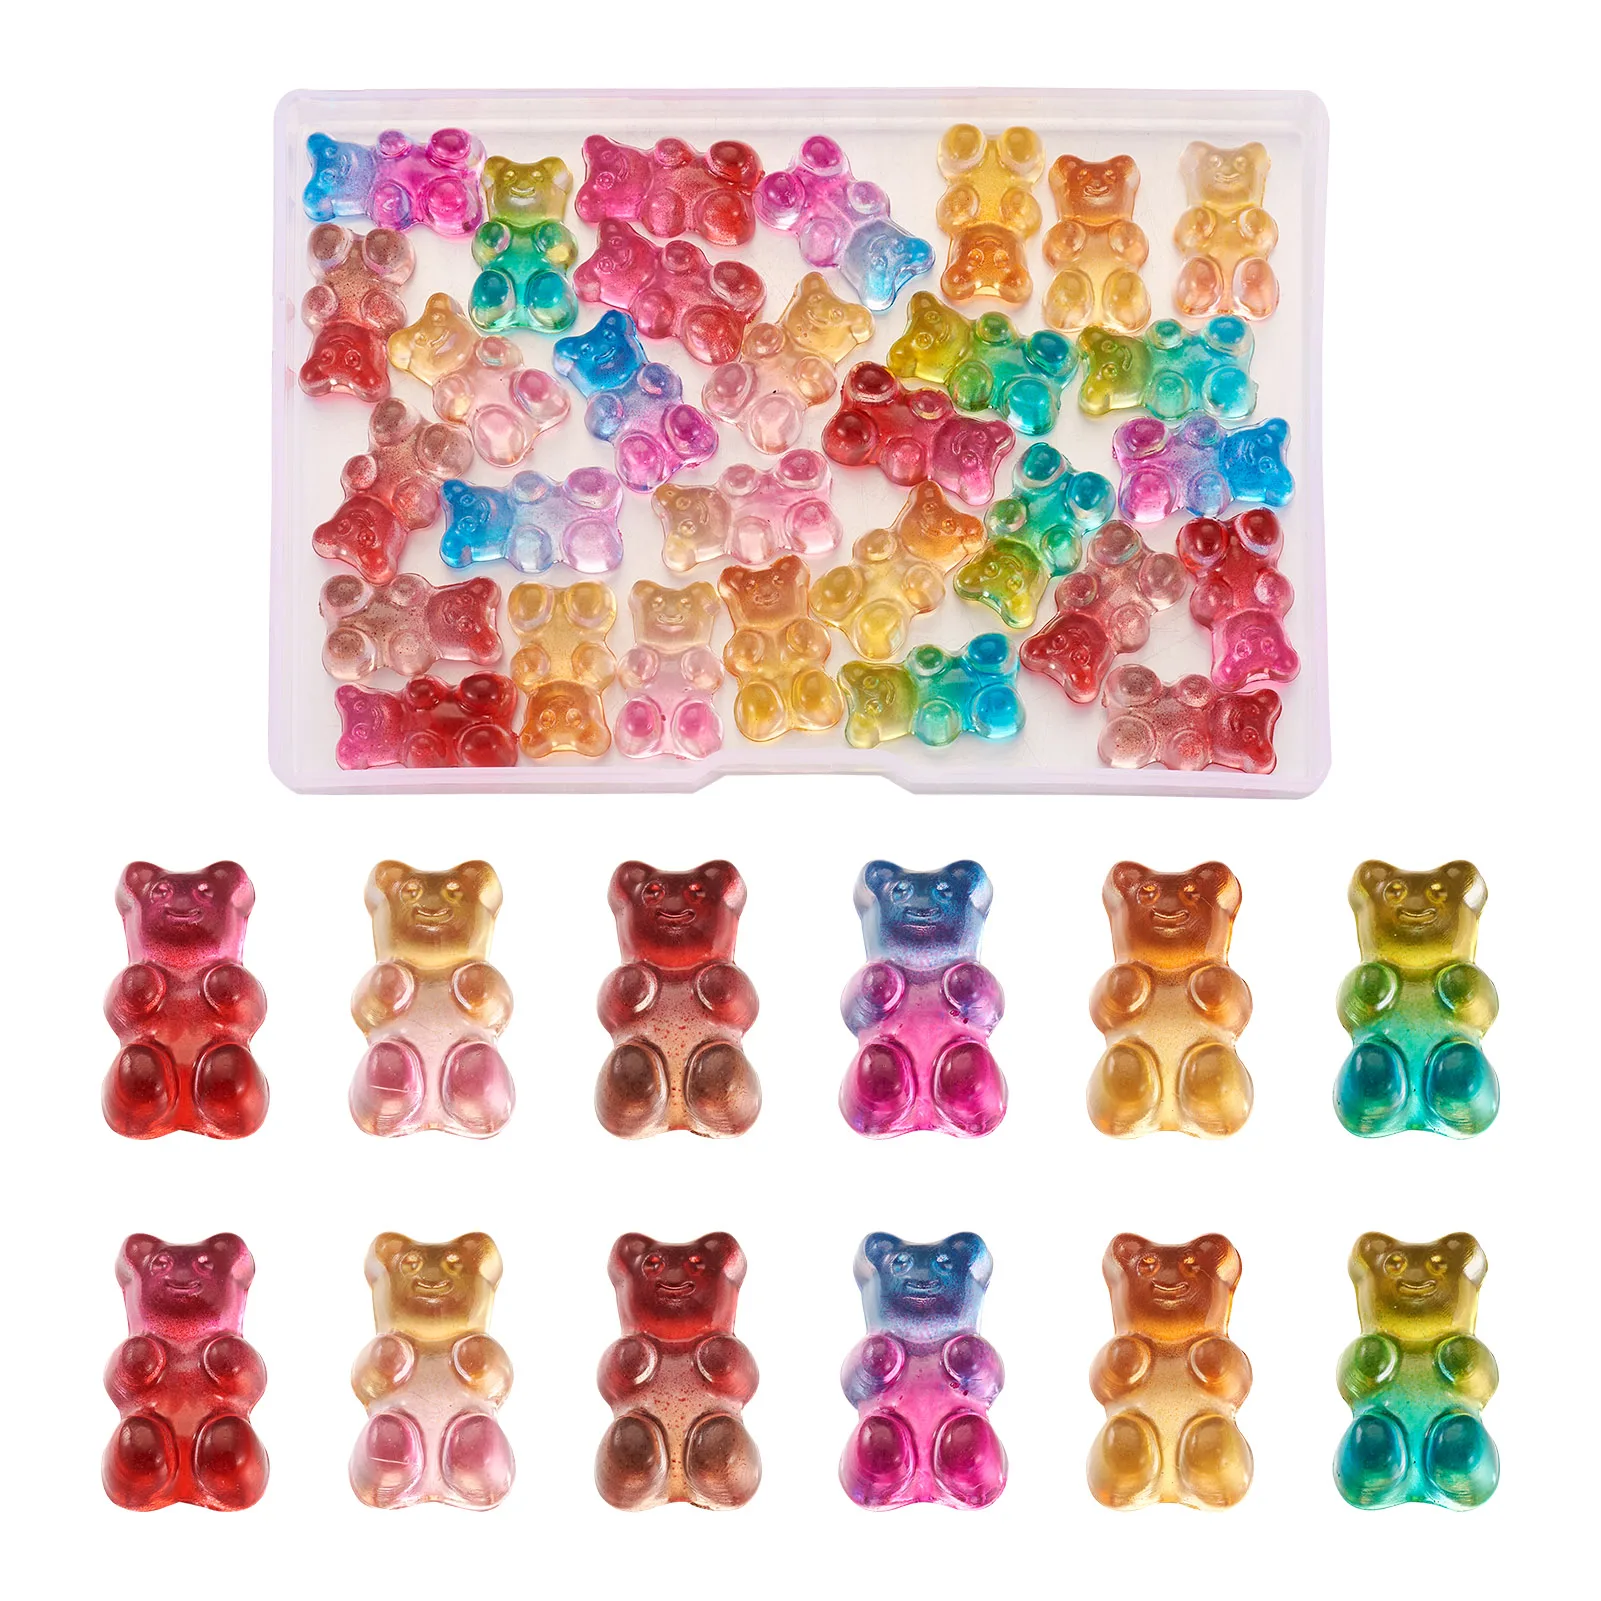 

1 Box Kawaii Bear Translucent Resin Acrylic Cabochons Charms Pendants For Lovely DIY Earring Bracelet Jewelry Making Accessories